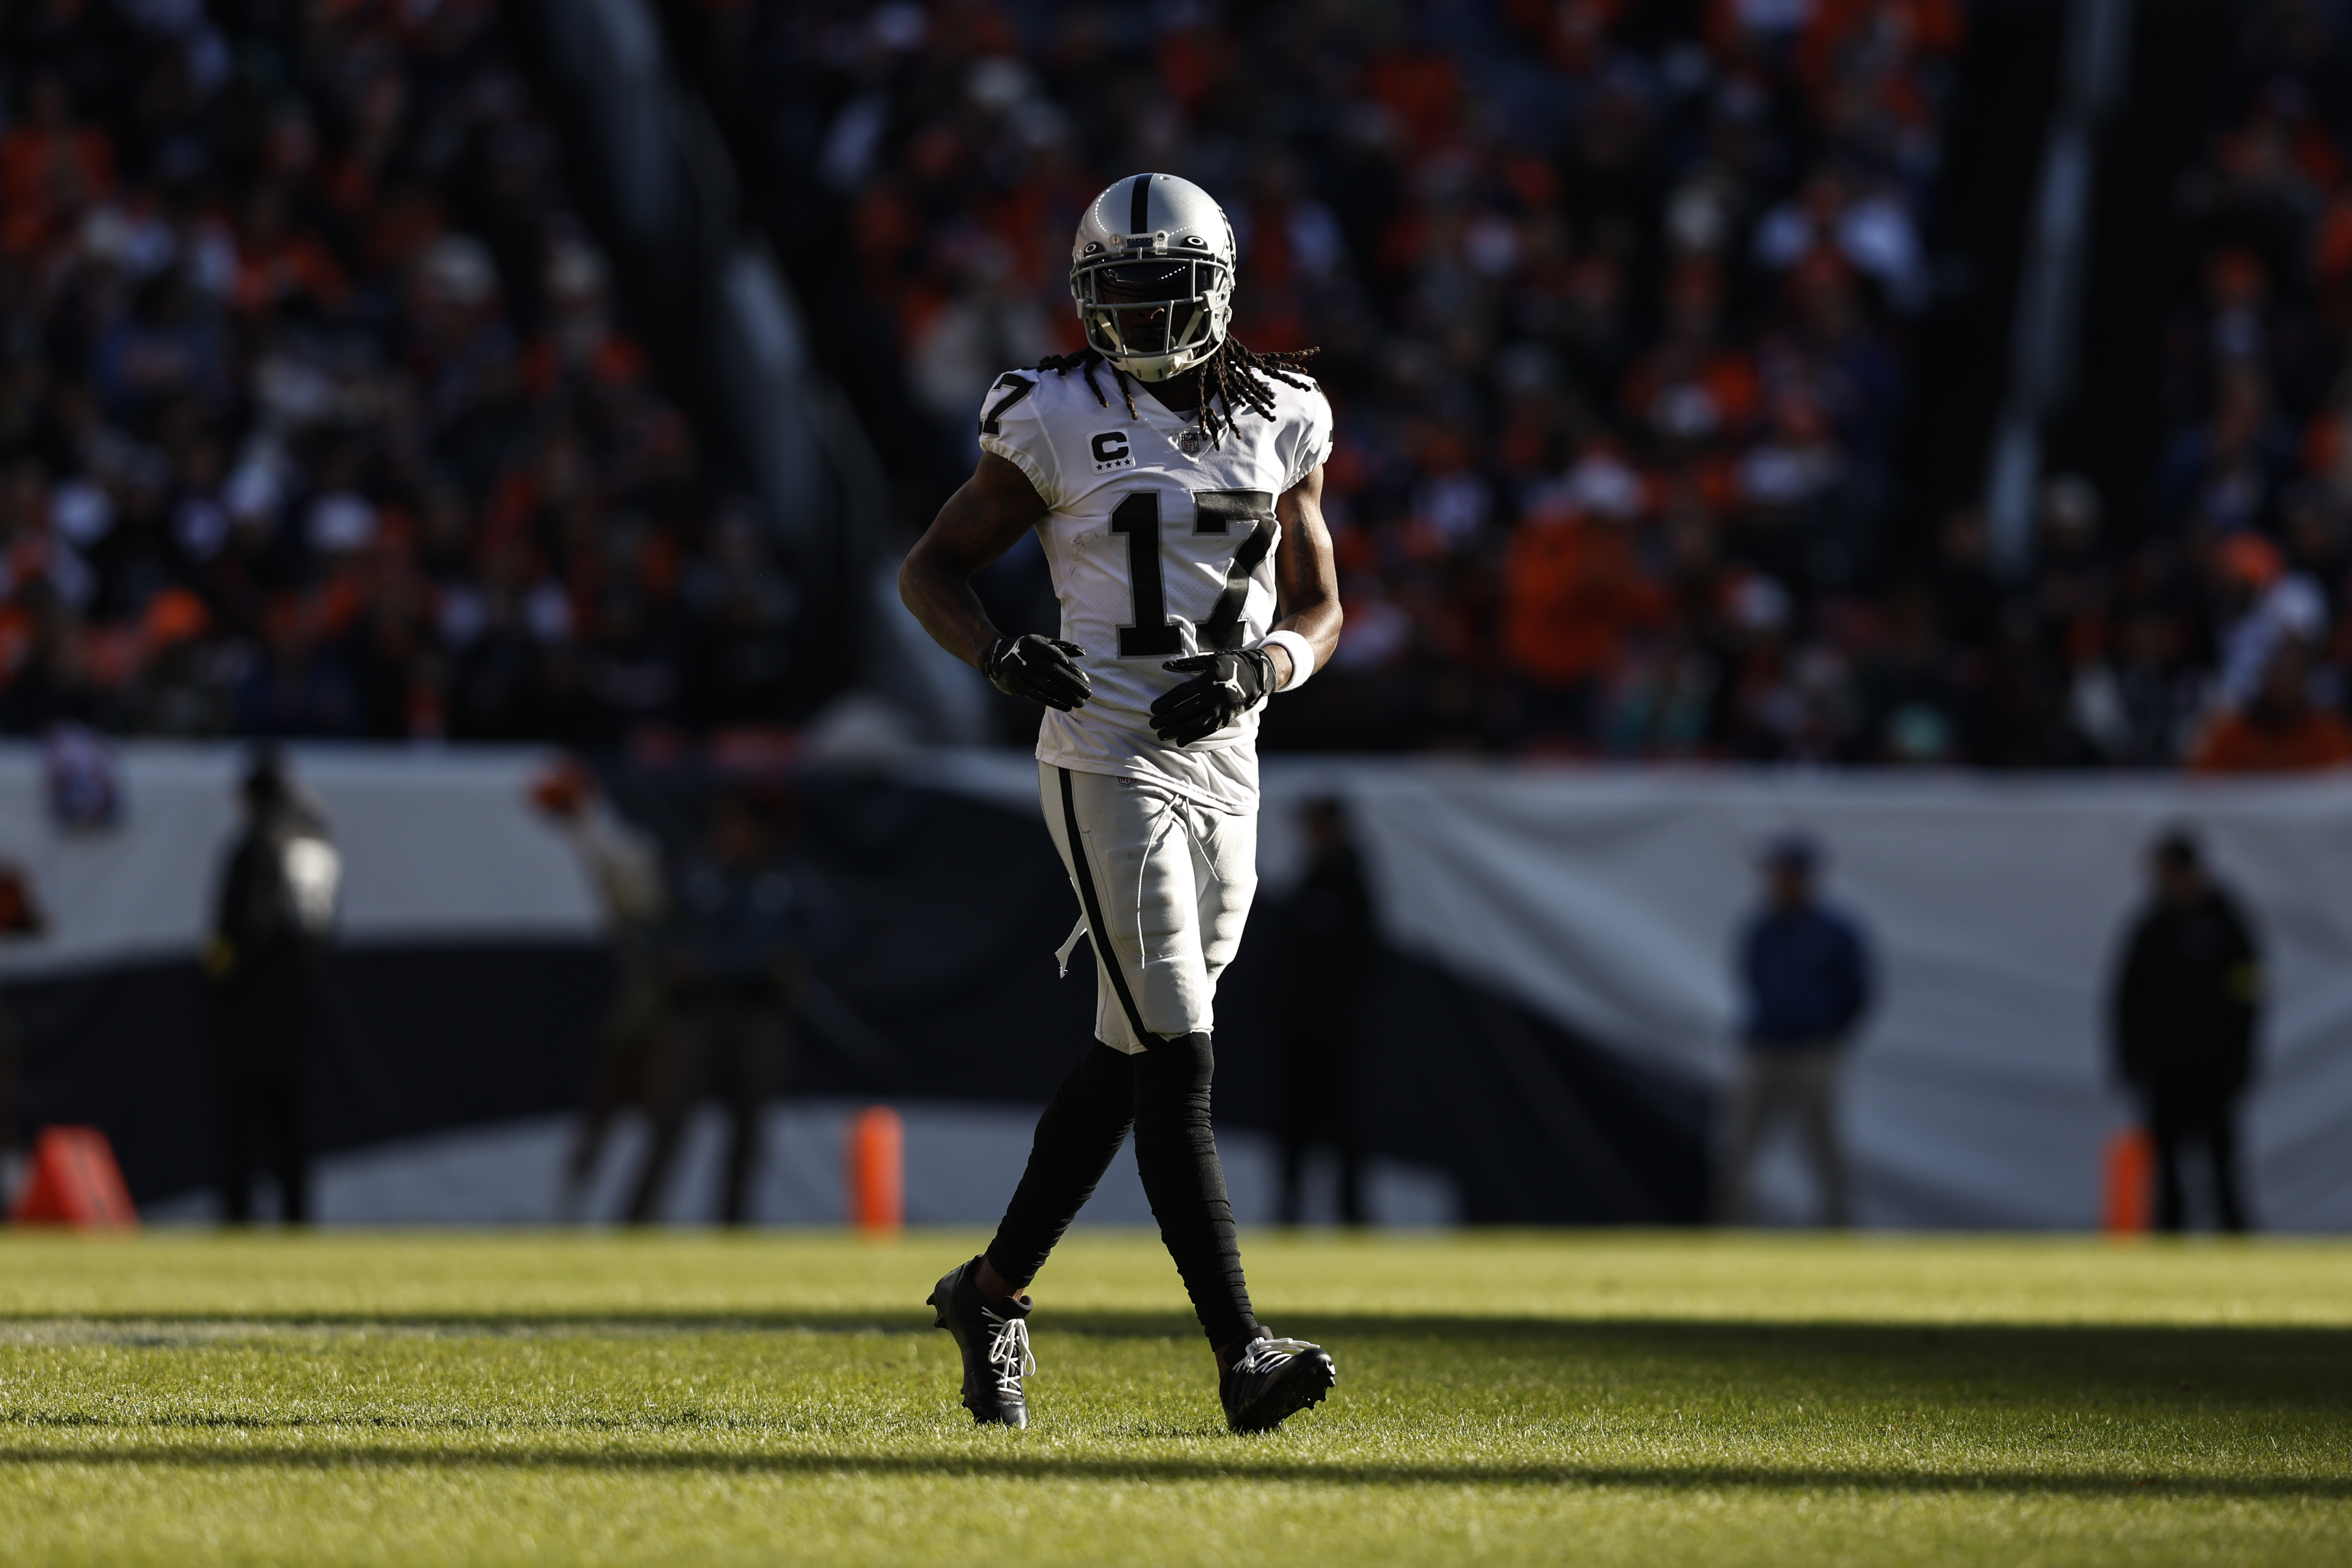 Davante Adams #17 of the Las Vegas Raiders runs during an NFL game between the Las Vegas Raiders and Denver Broncos at Empower Field At Mile High on November 20, 2022 in Denver, Colorado. The Las Vegas Raiders won in overtime